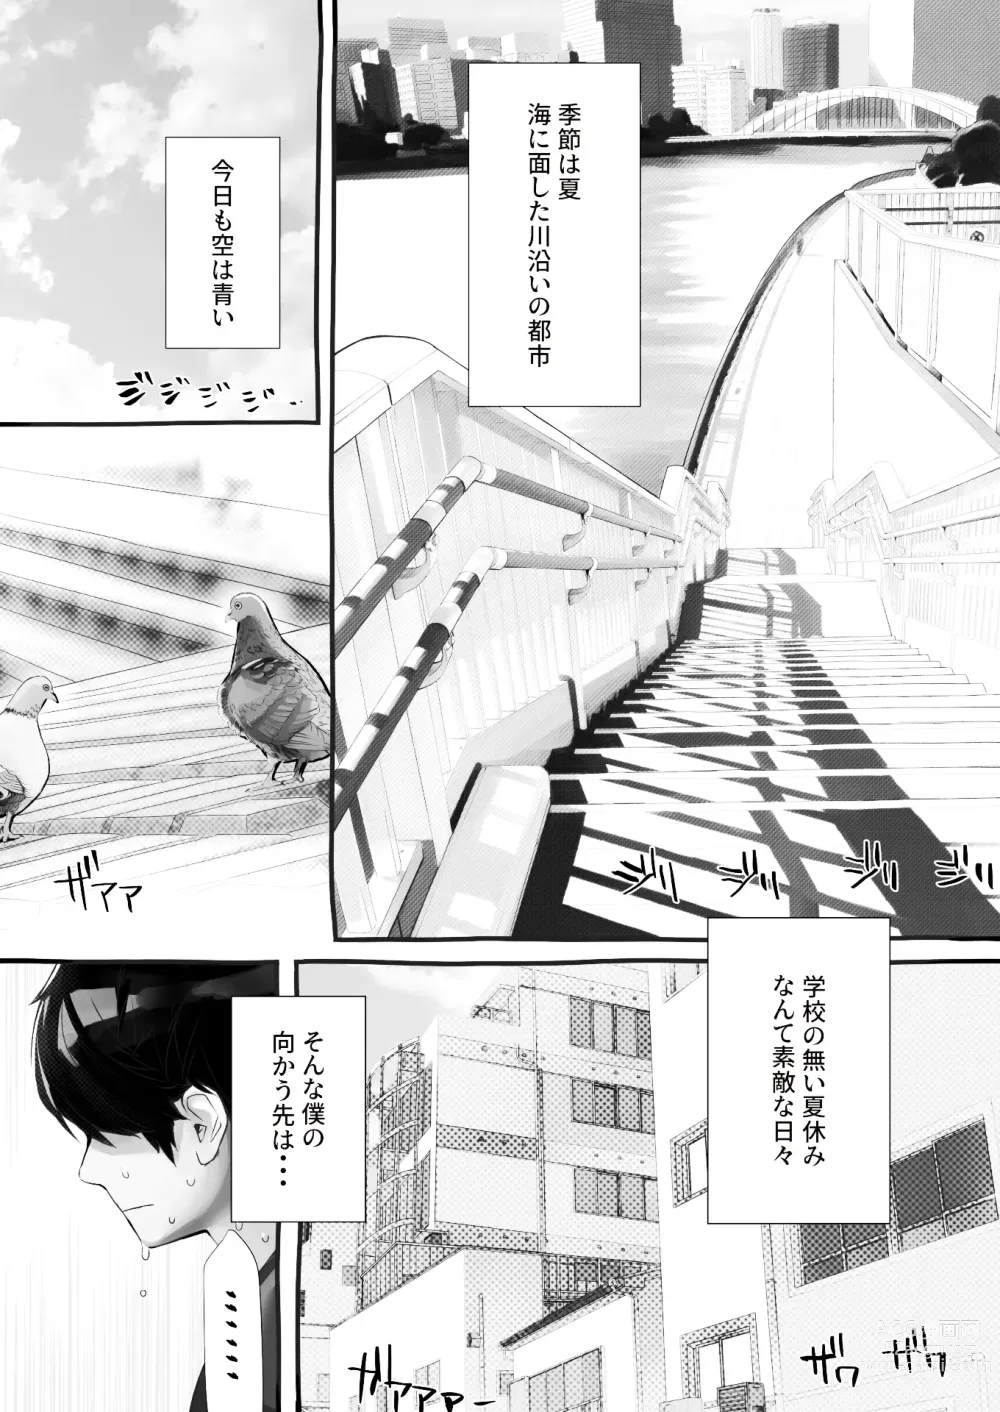 Page 2 of doujinshi 僕の彼女が他人棒で絶頂いたす